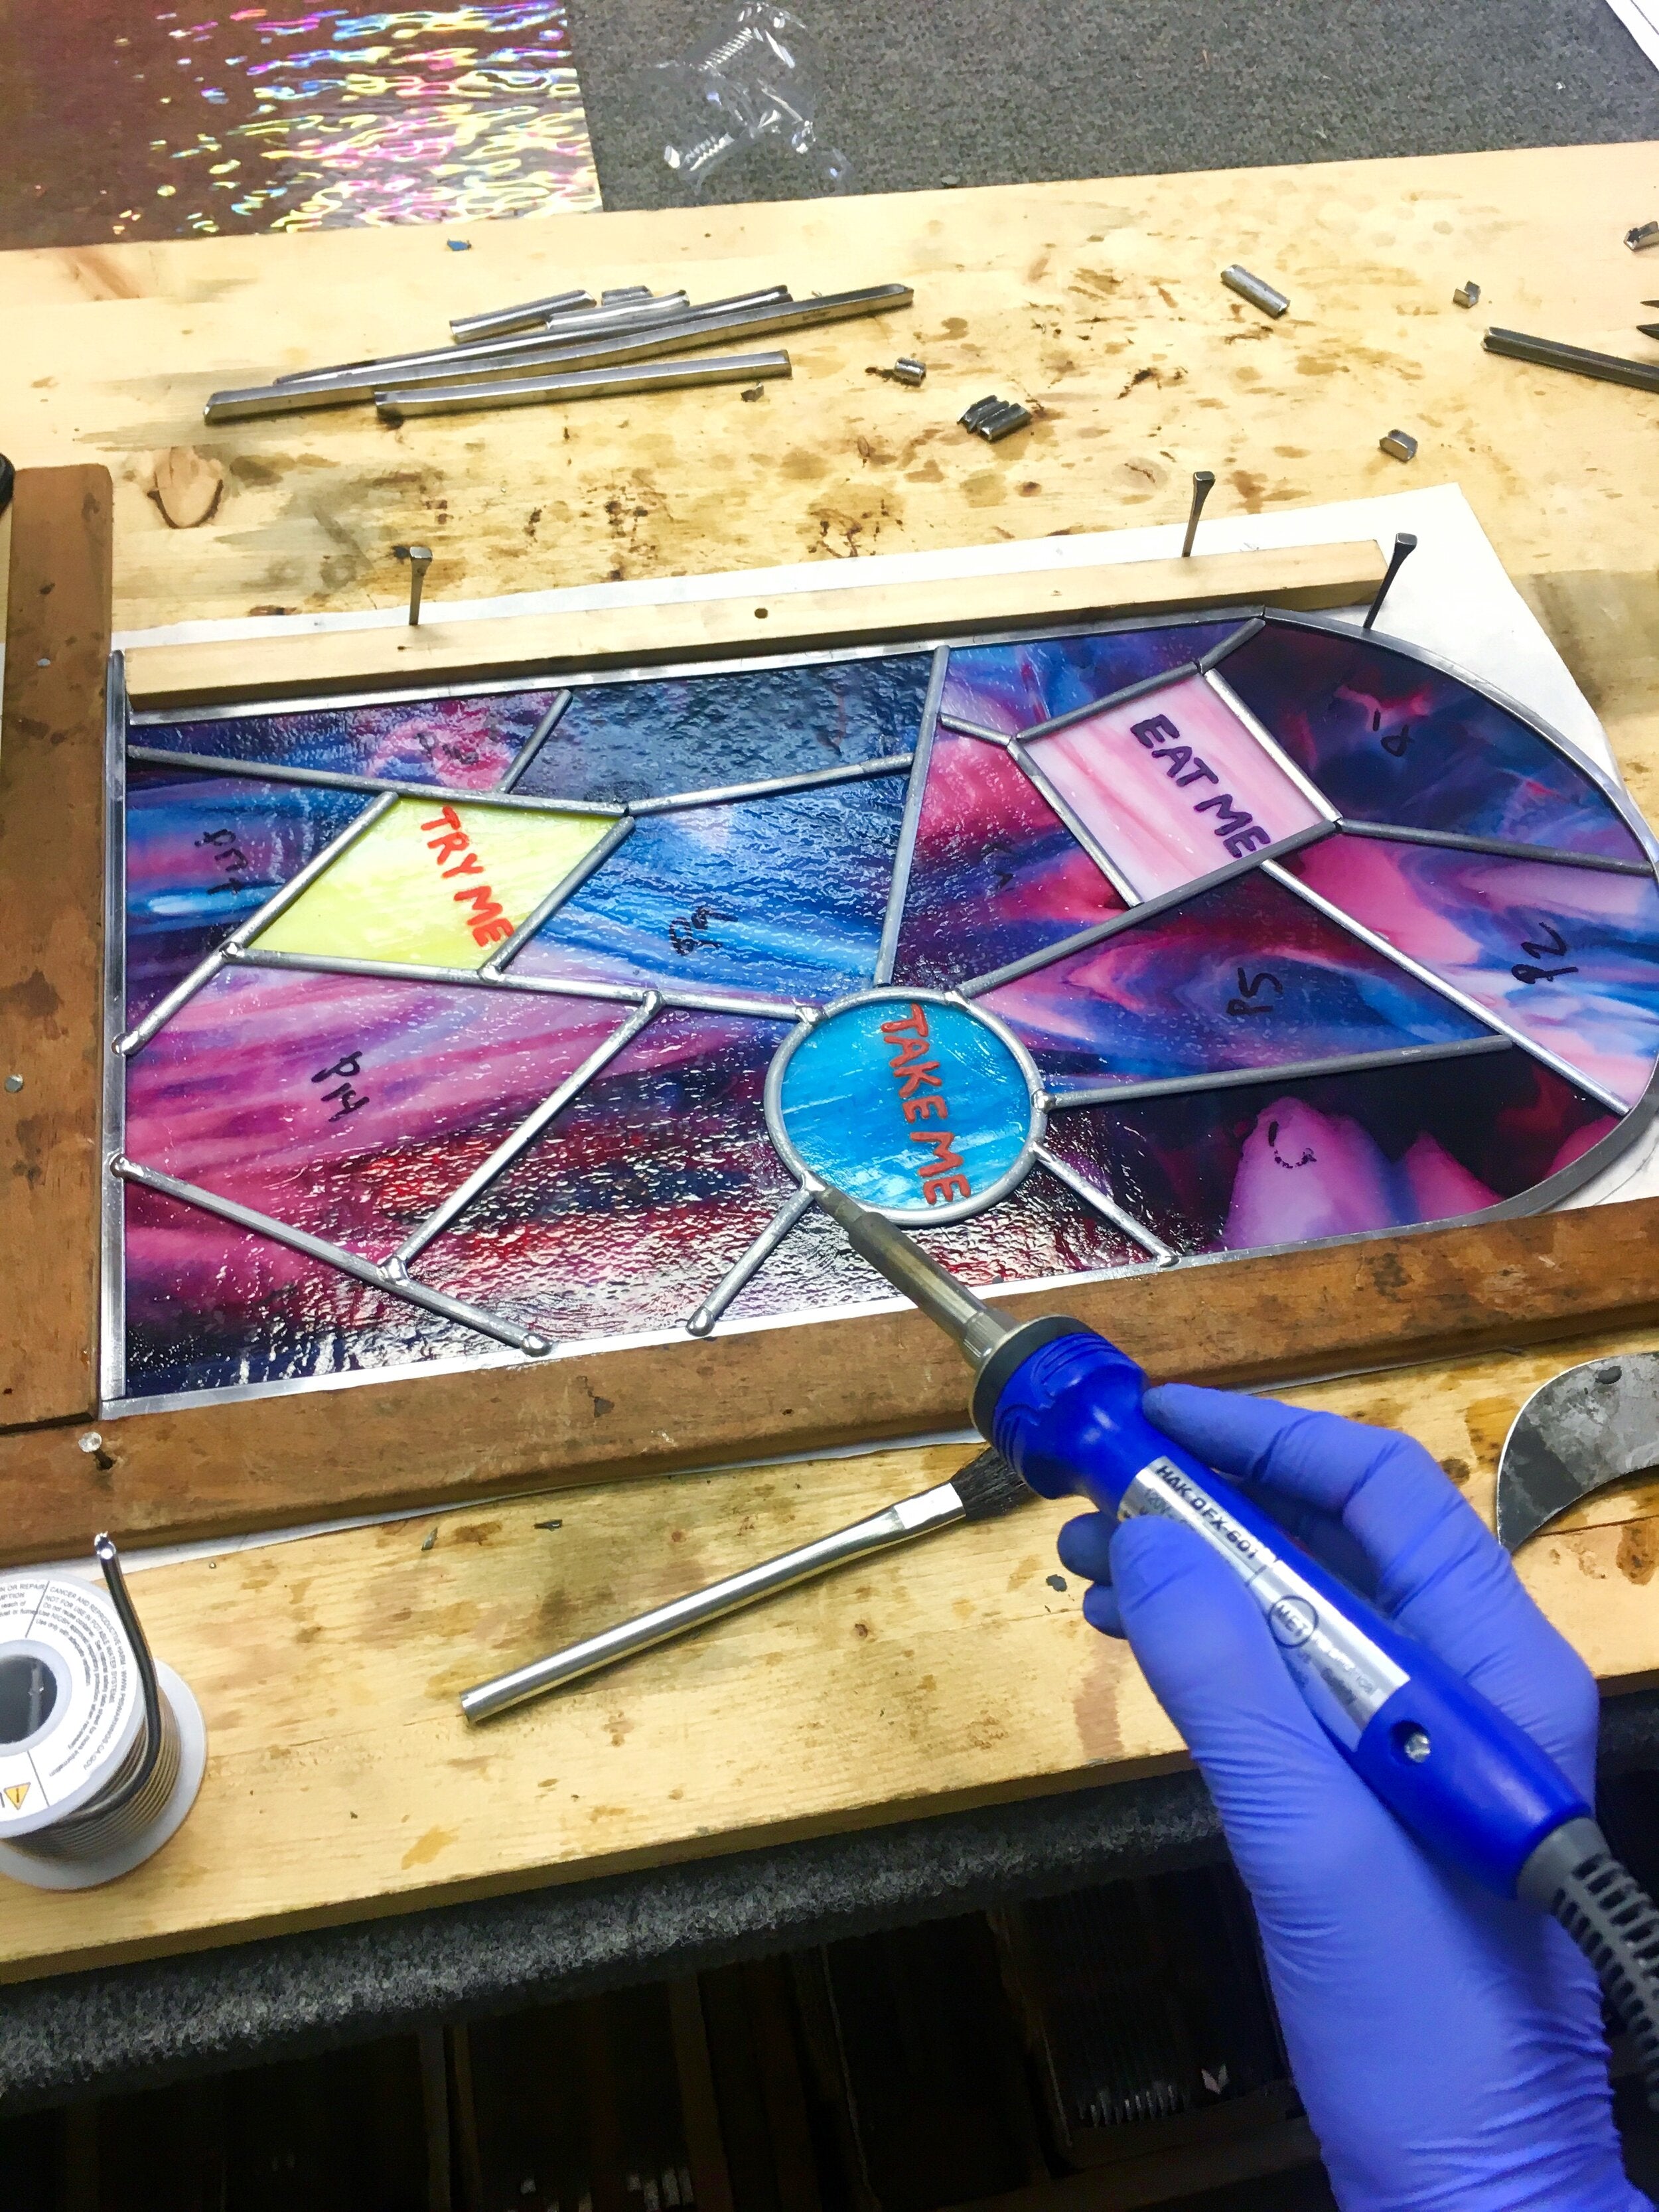 Tools - Anything in Stained Glass